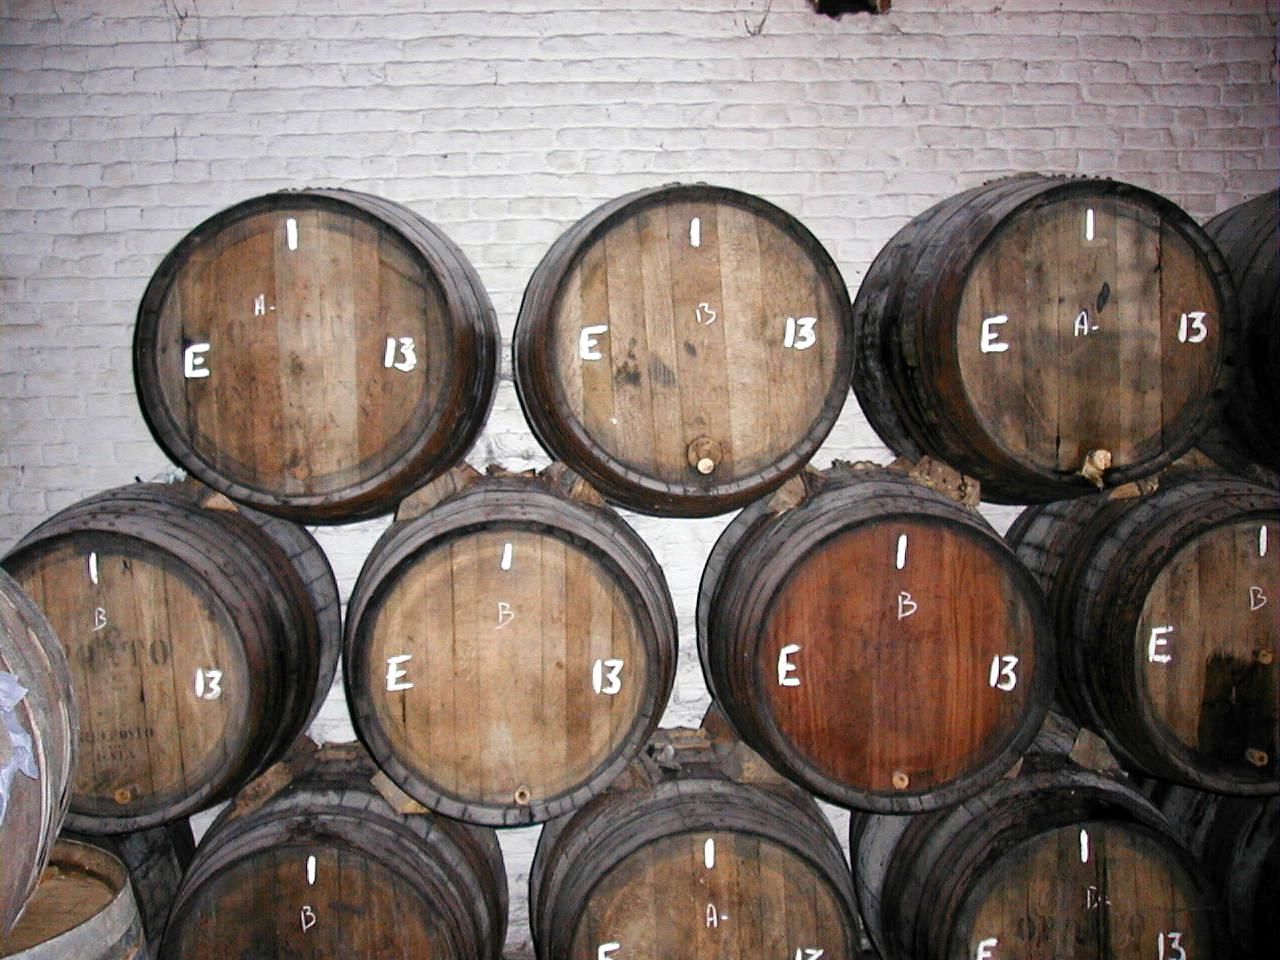 Fermenting barrels at Cantillon Brewery, in Brussels. My own photo.